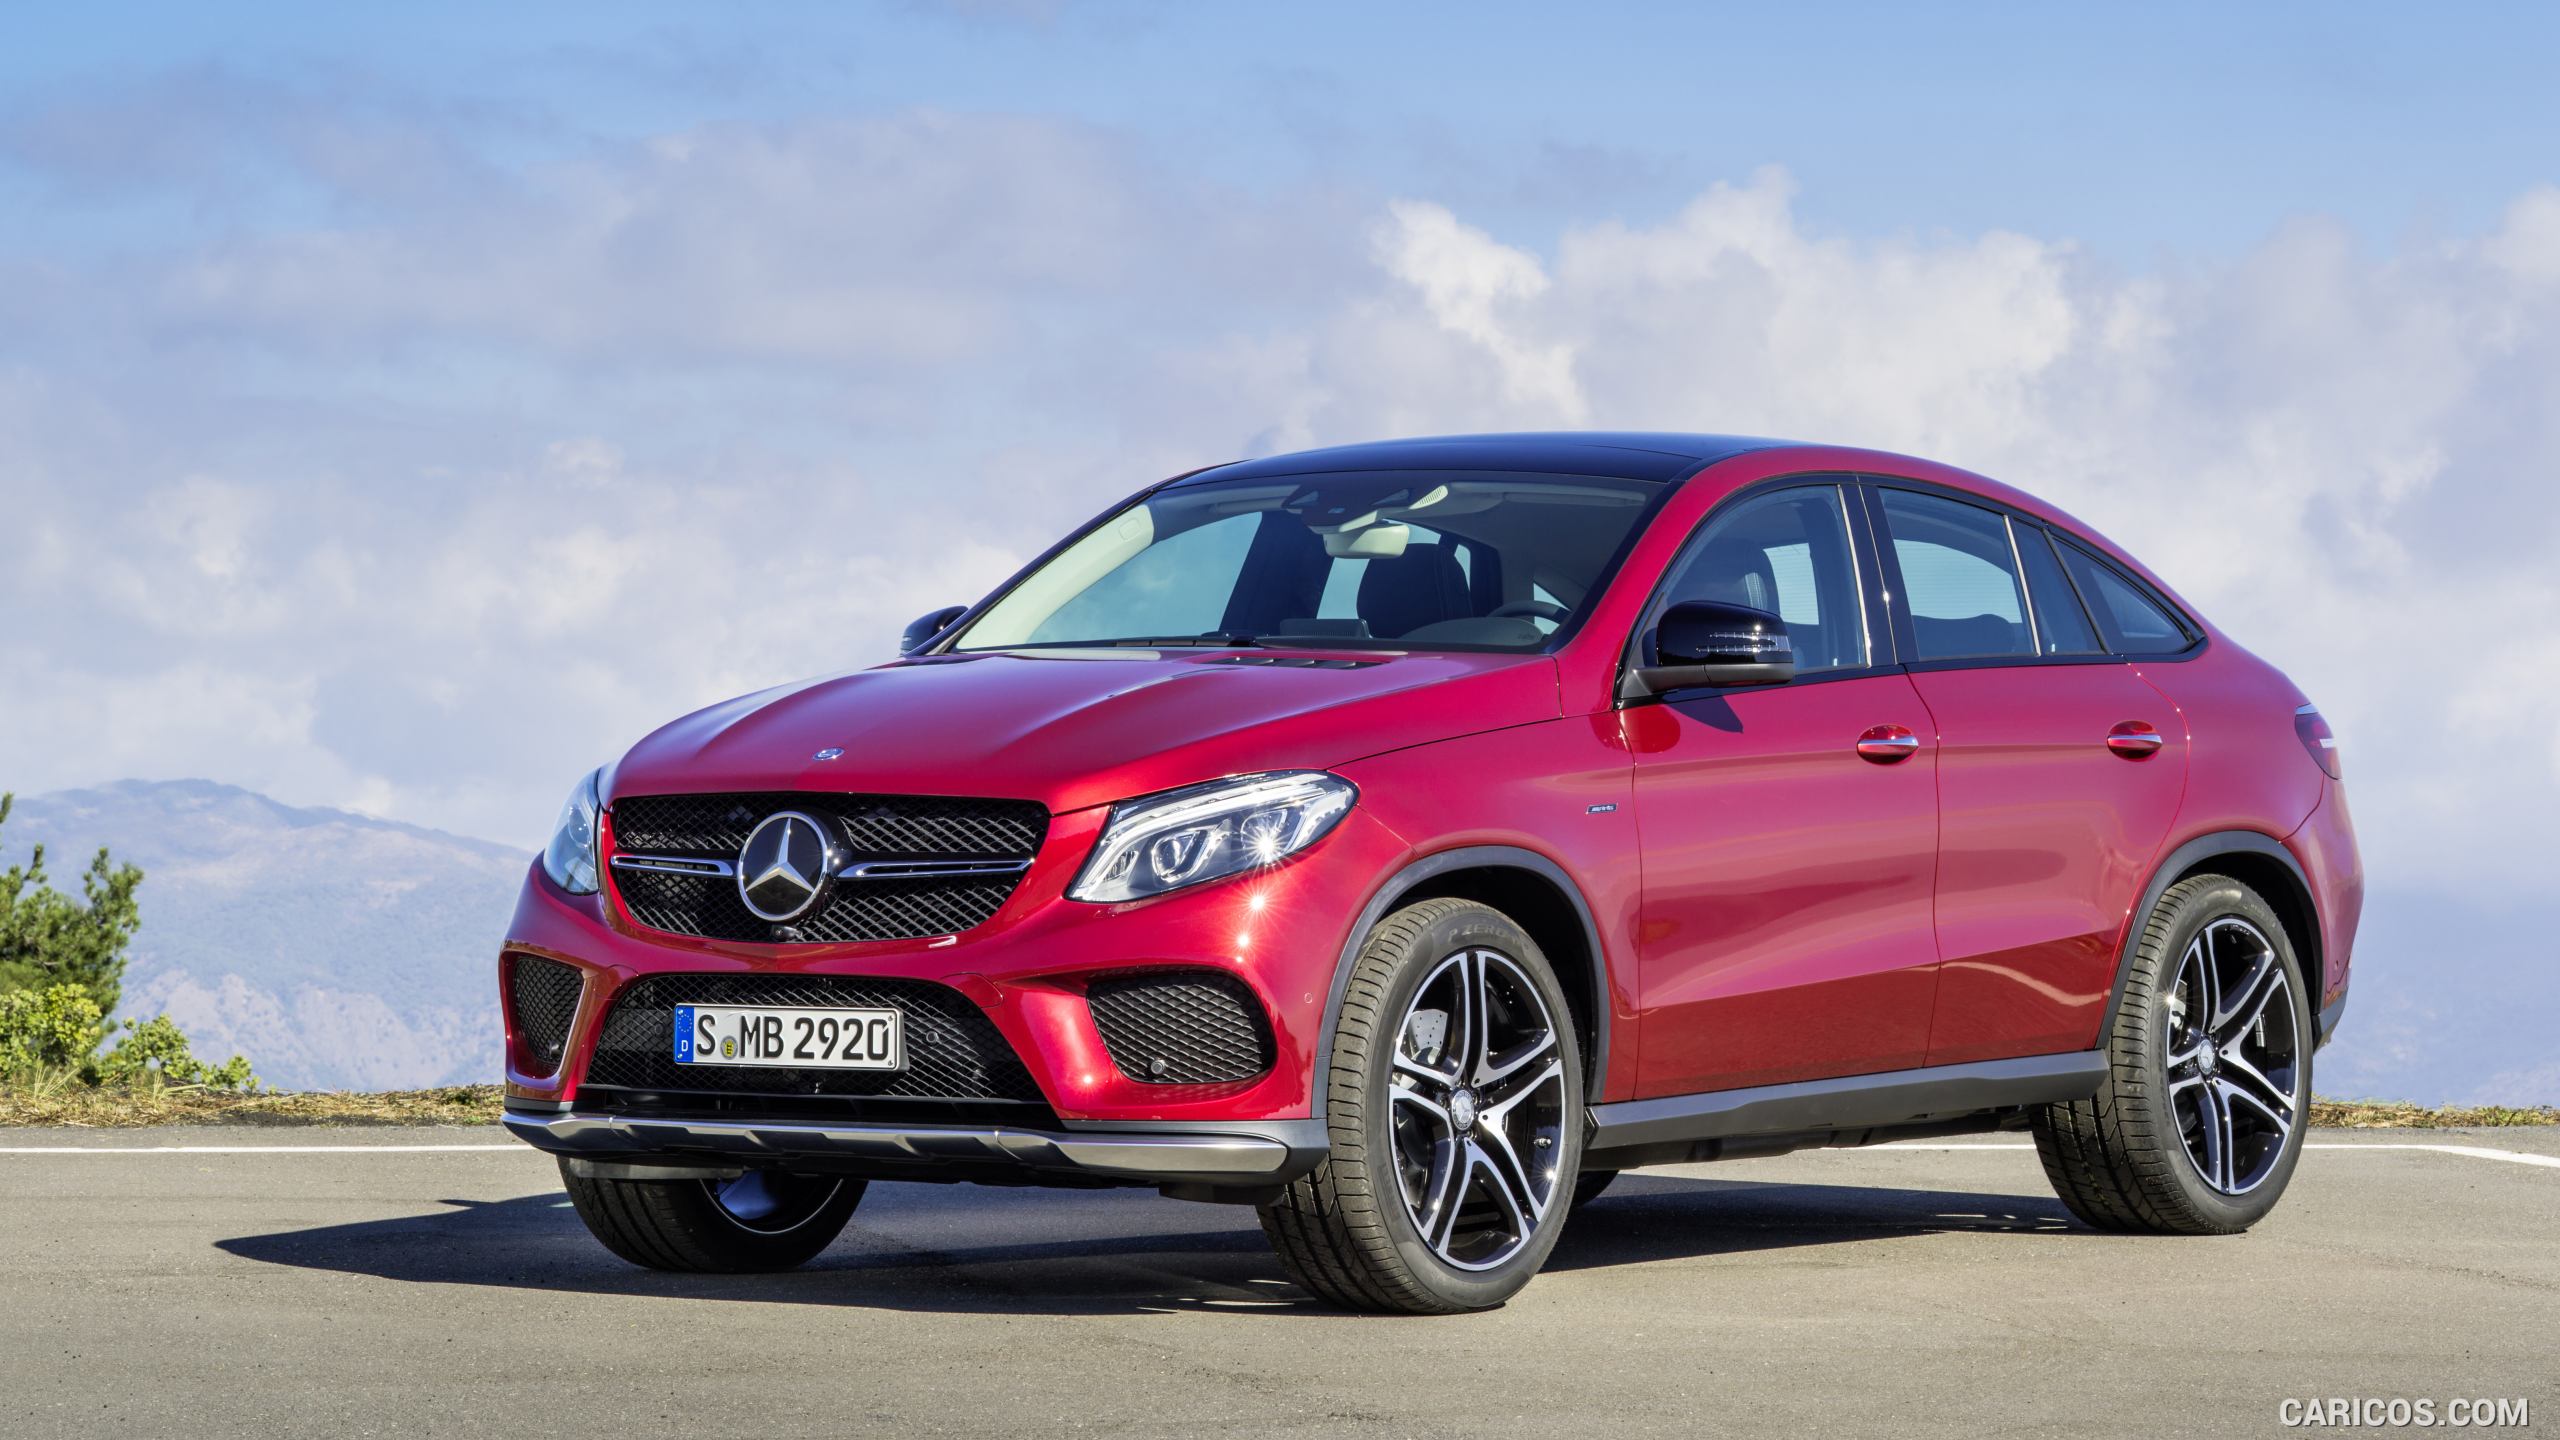 2016 Mercedes-Benz GLE 450 AMG Coupe 4MATIC (Designo Hyacinth Red Metallic) - Front, #32 of 115